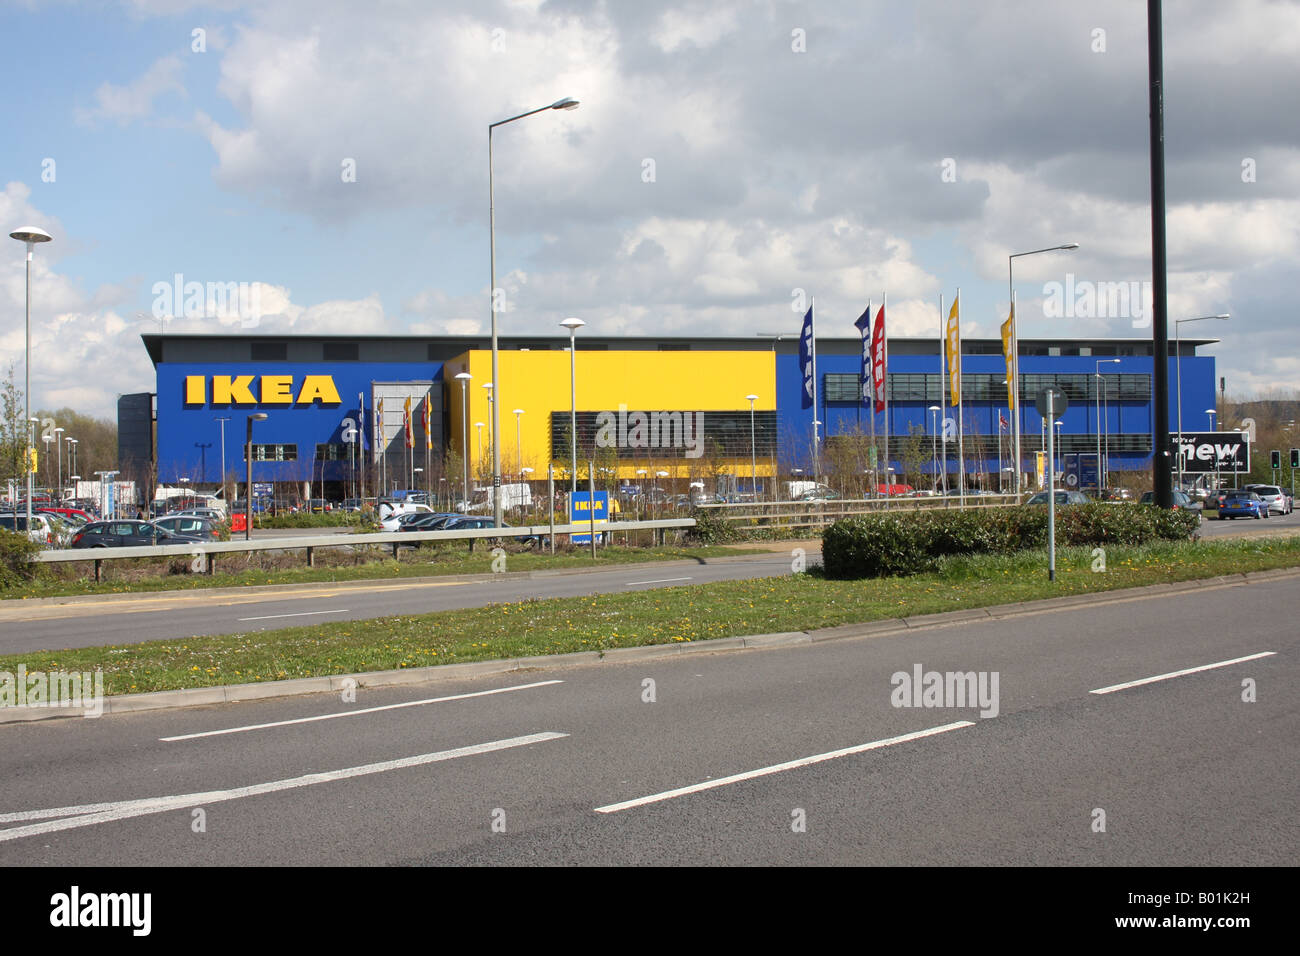 Ikea out of town, home furnish mega store in Milton Keynes UK. Stock Photo